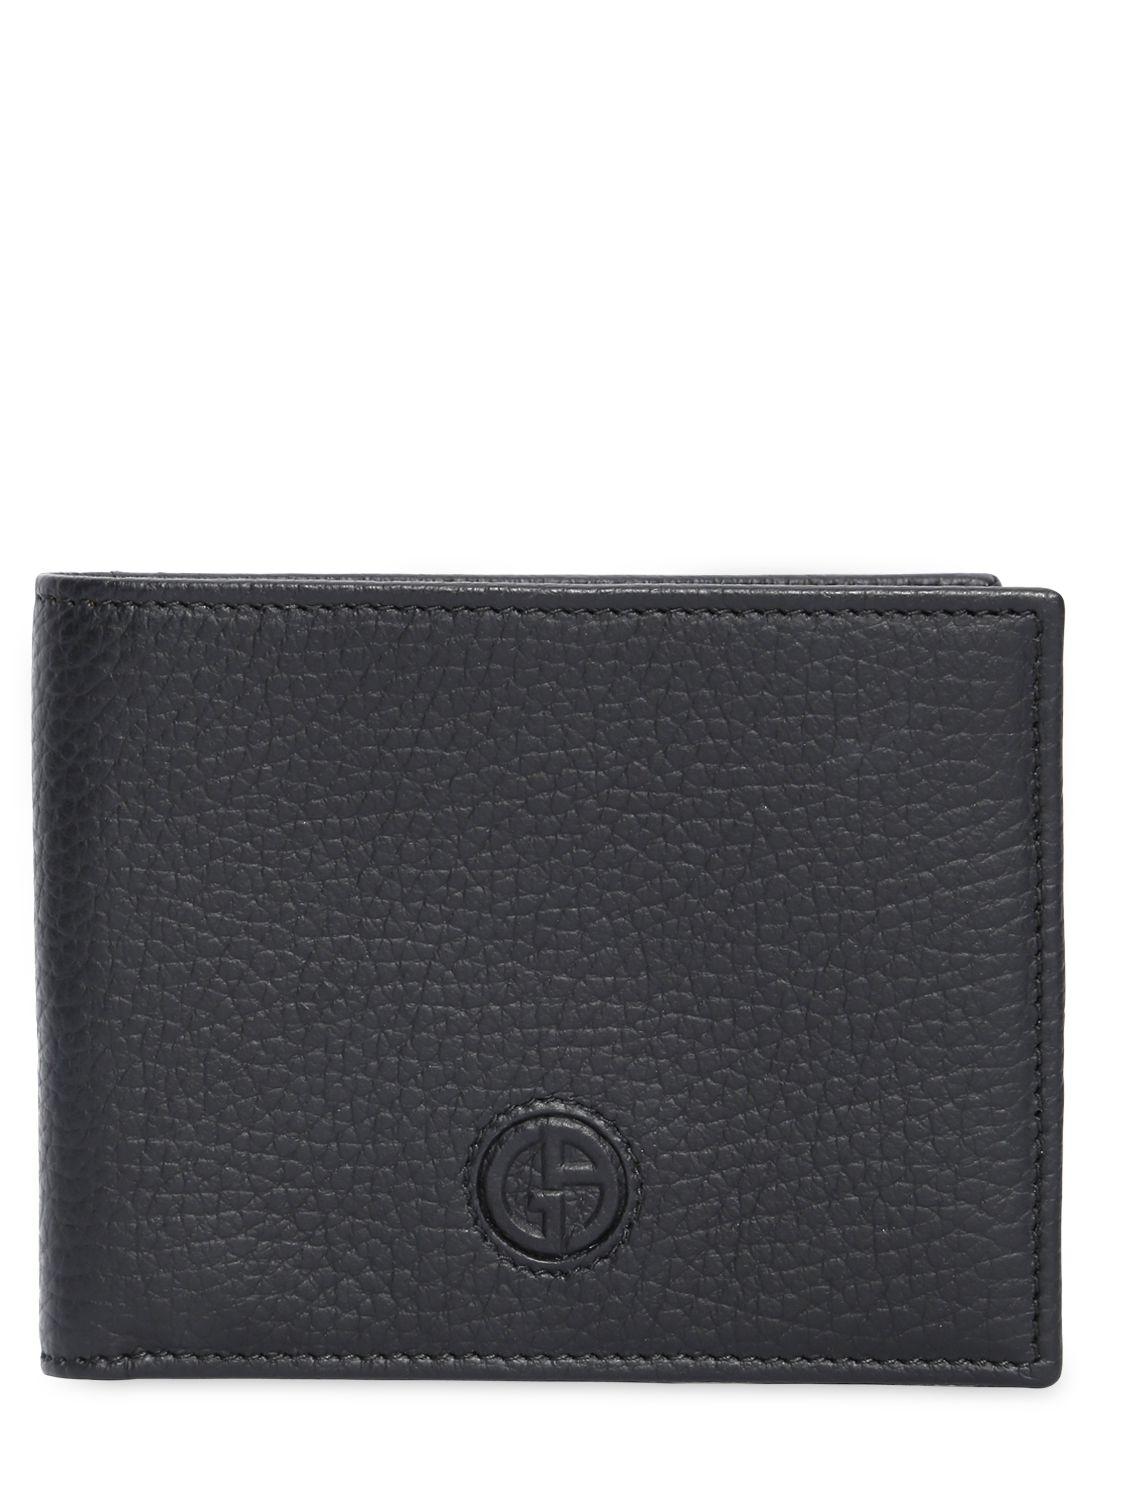 Giorgio Armani Hammered Leather Classic Wallet in Black for Men - Lyst